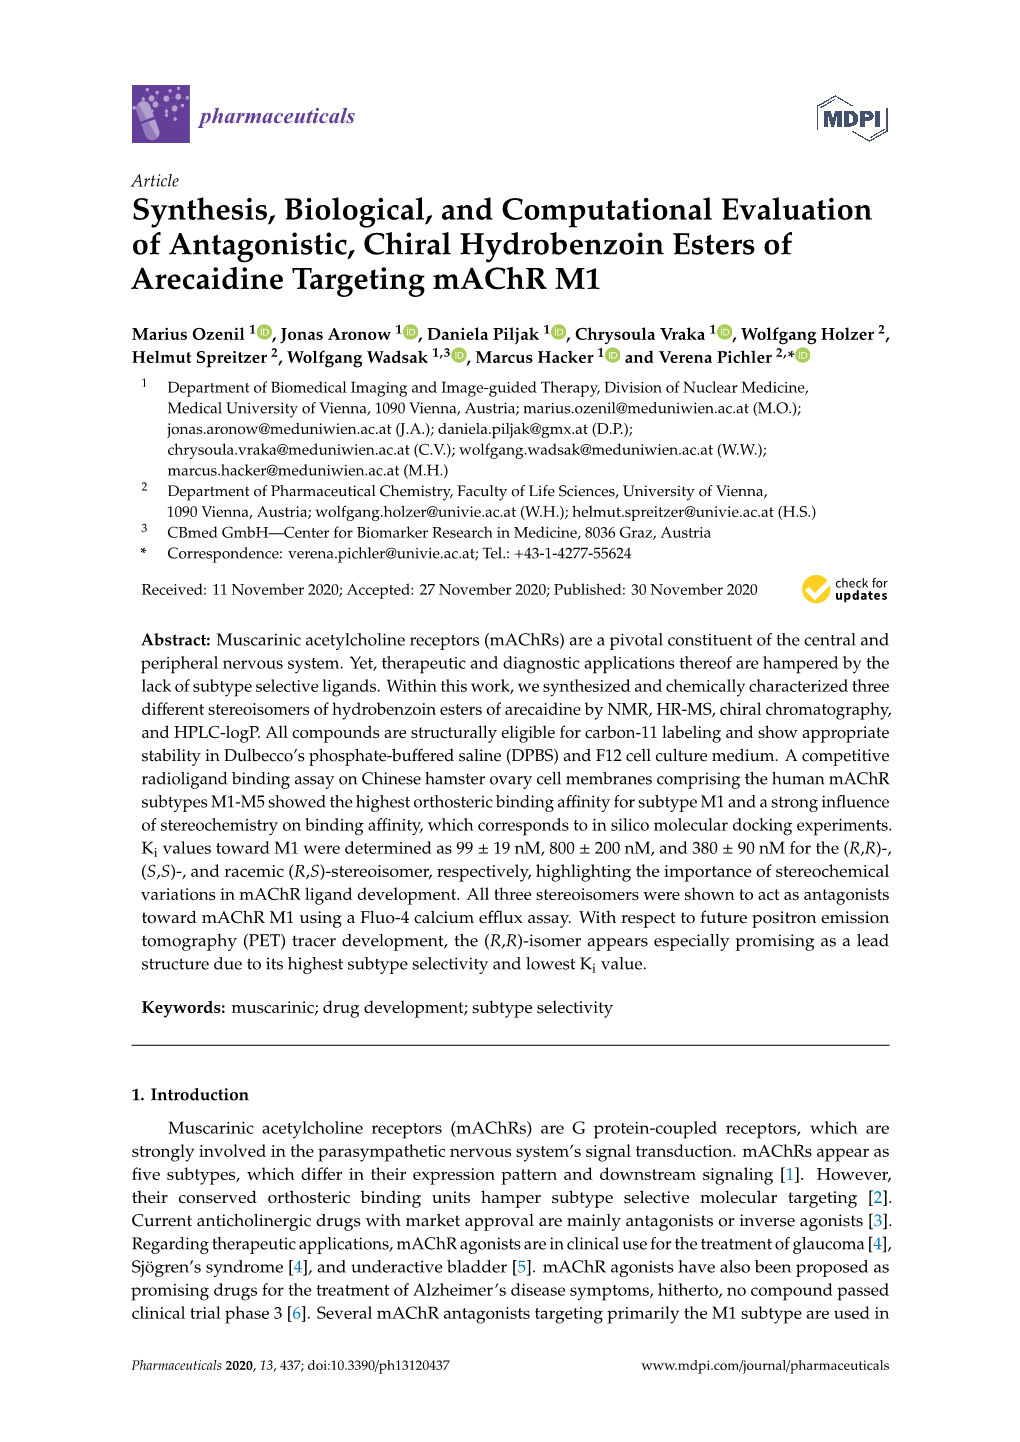 Synthesis, Biological, and Computational Evaluation of Antagonistic, Chiral Hydrobenzoin Esters of Arecaidine Targeting Machr M1